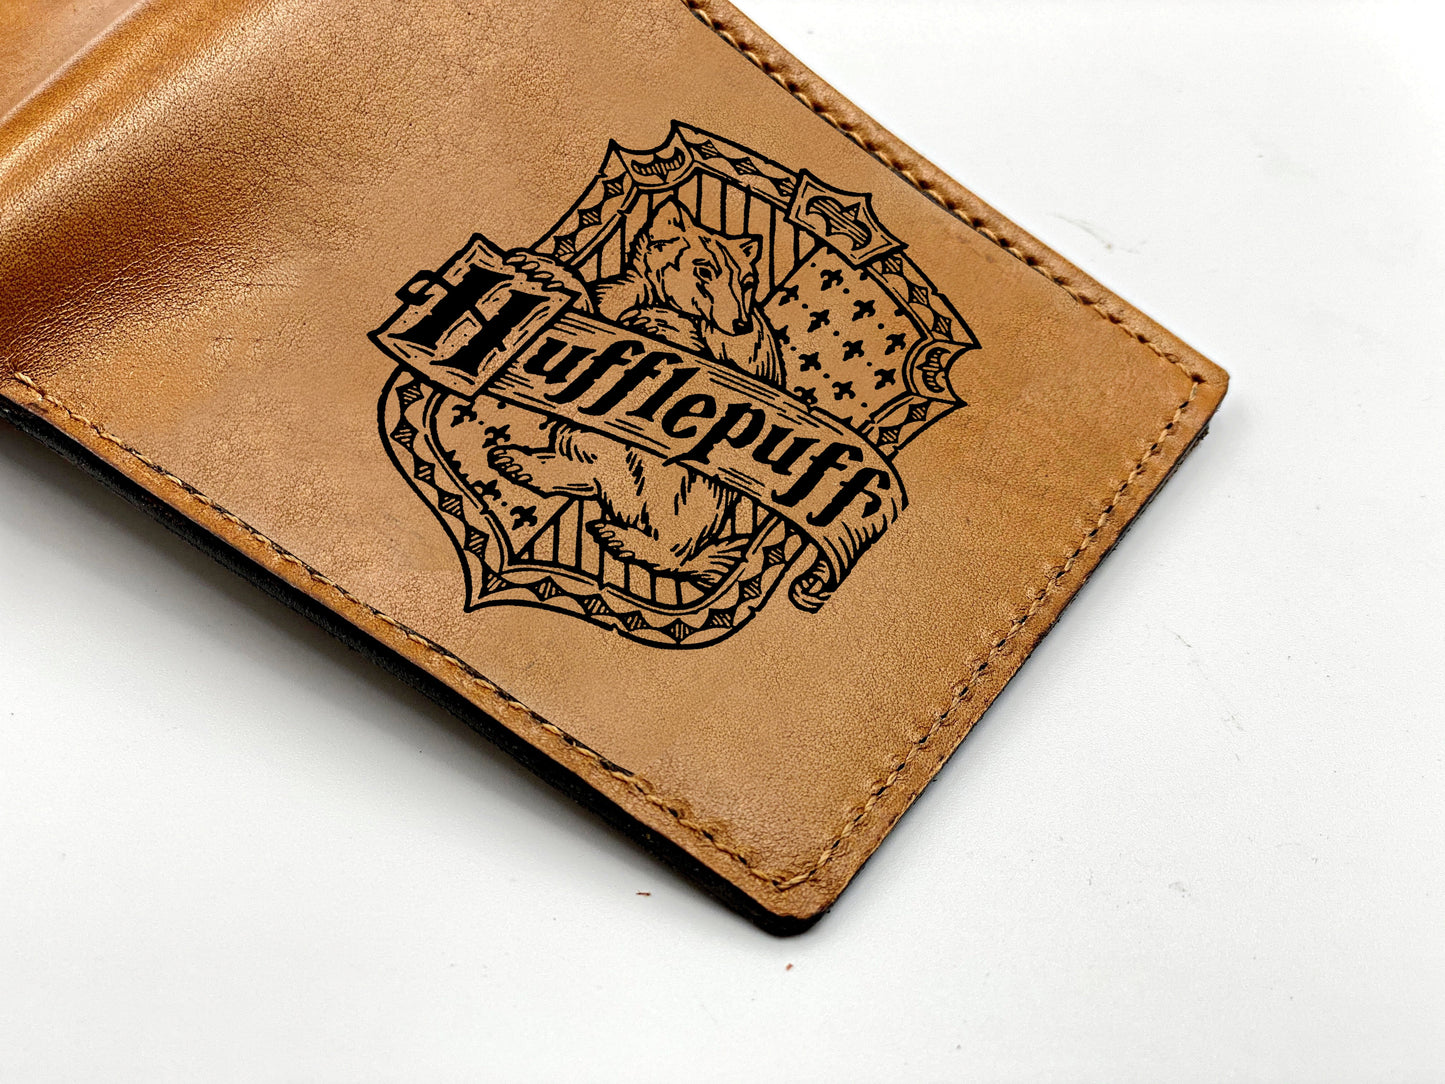 Mayan Corner - Custom leather wallet, Harry Porter Hogwarts School of Witchcraft and Wizardry logo houses wallet, leather gift for boyfriend